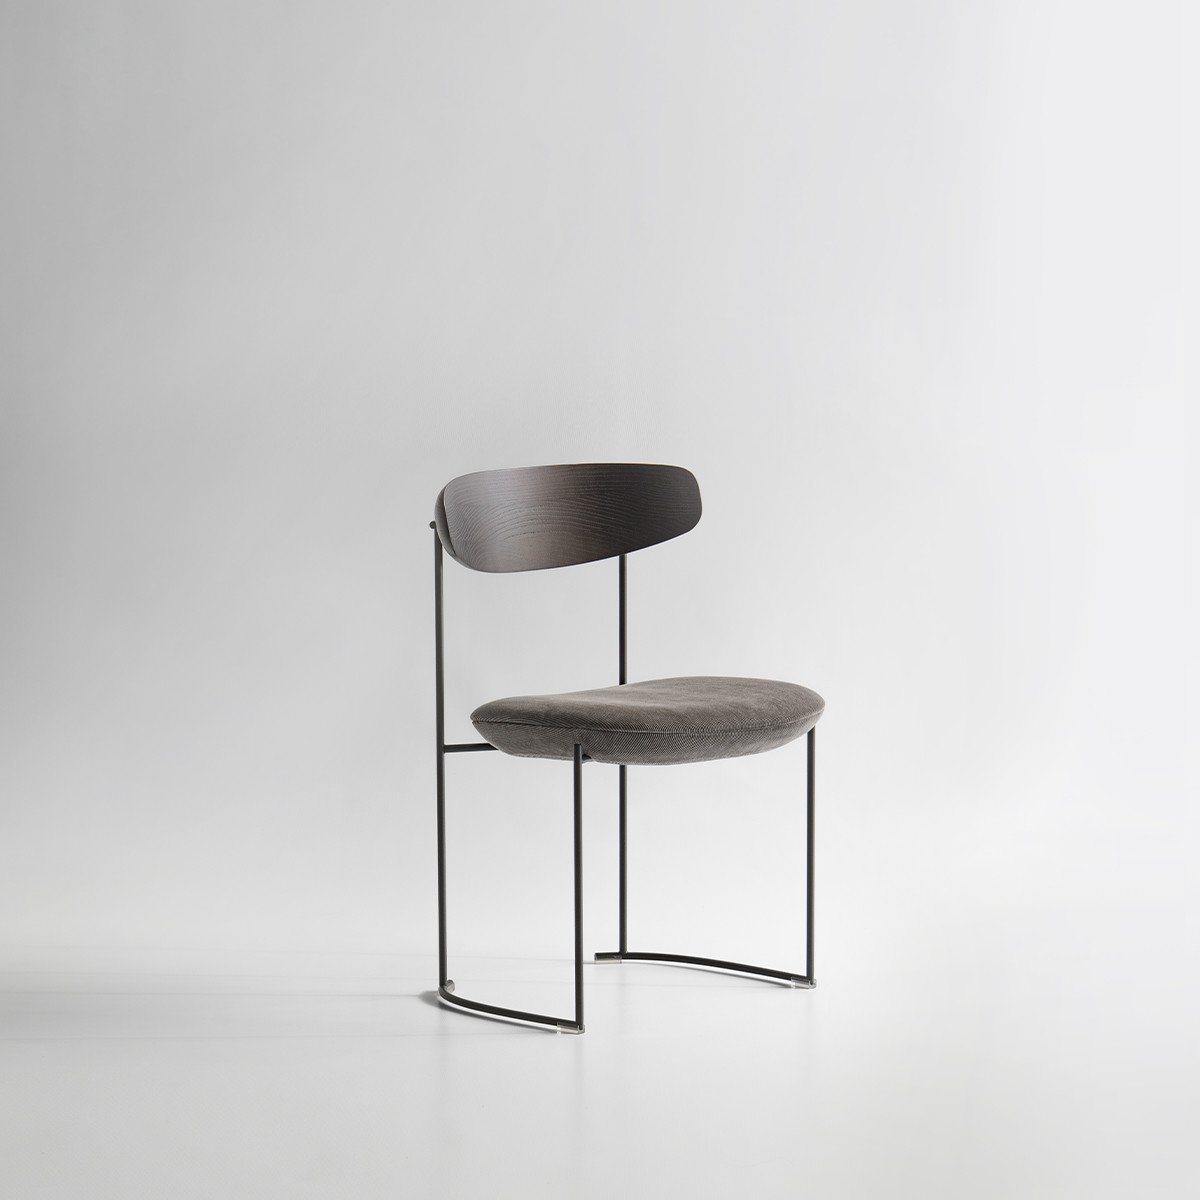 Keel Chair from Potocco, designed by M + V